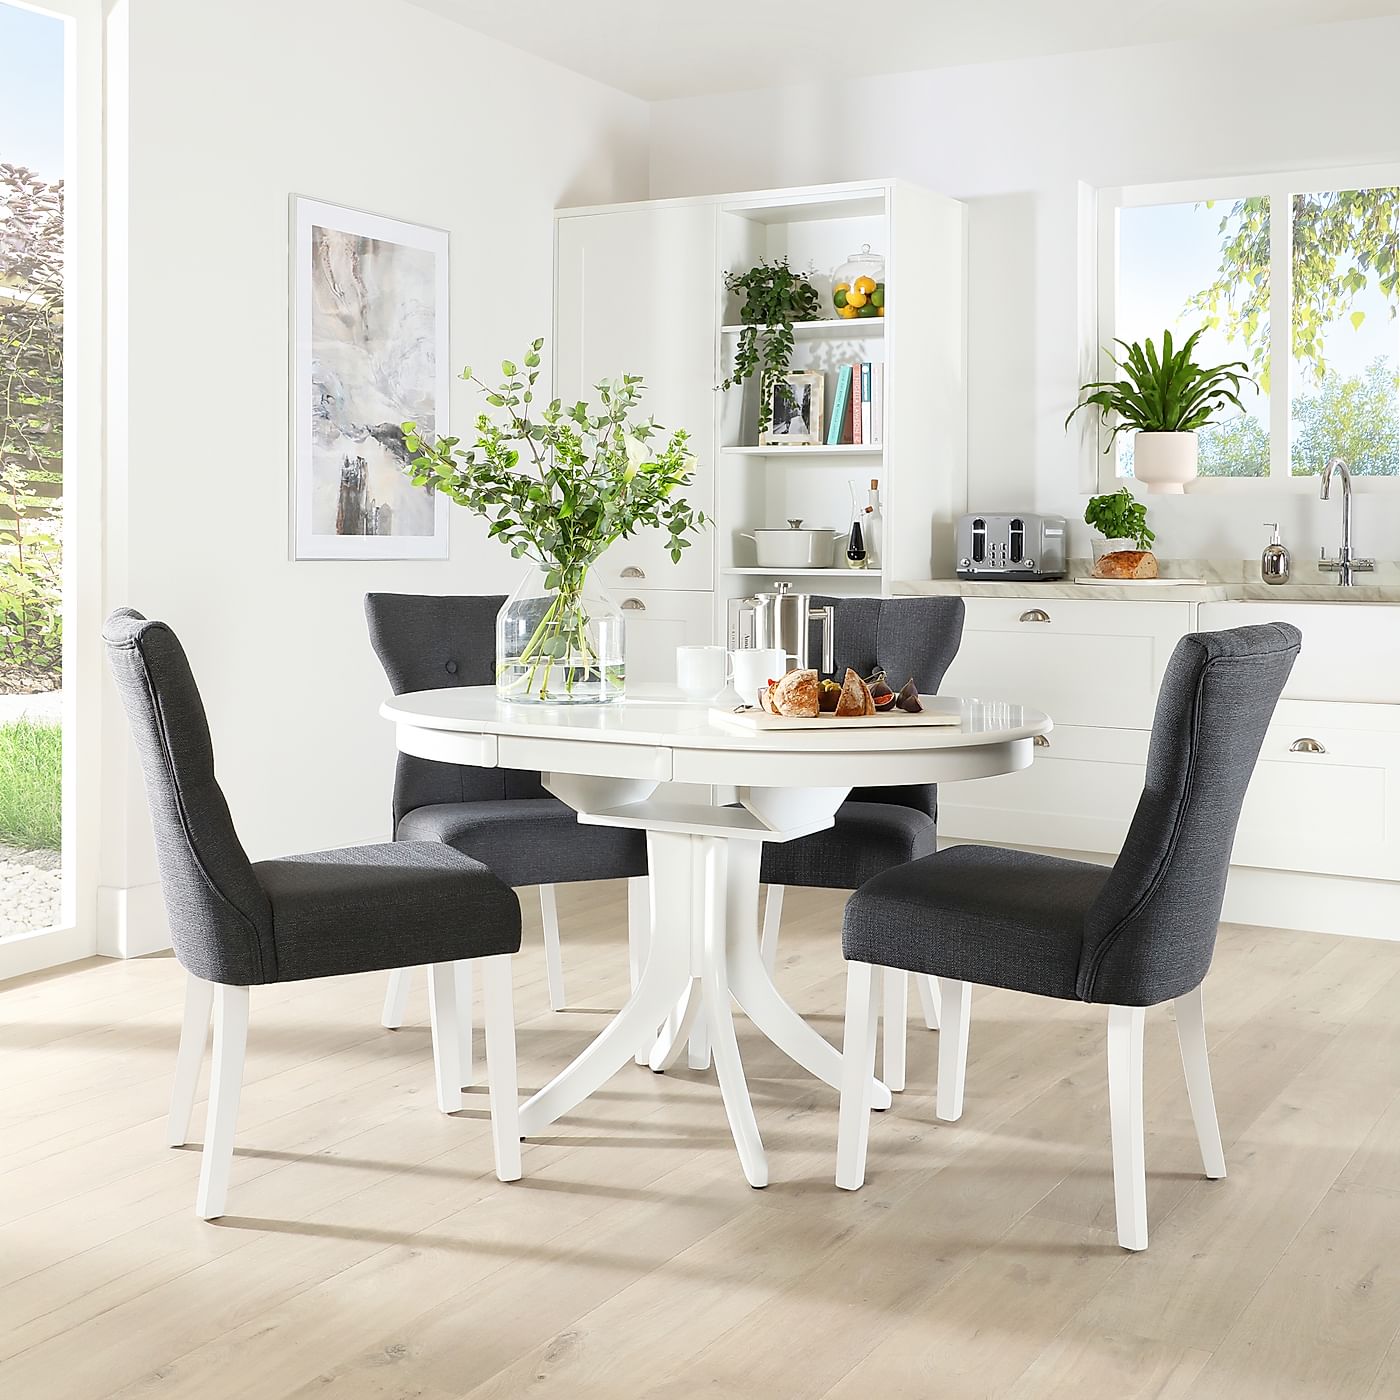  kitchen table and chairs uk